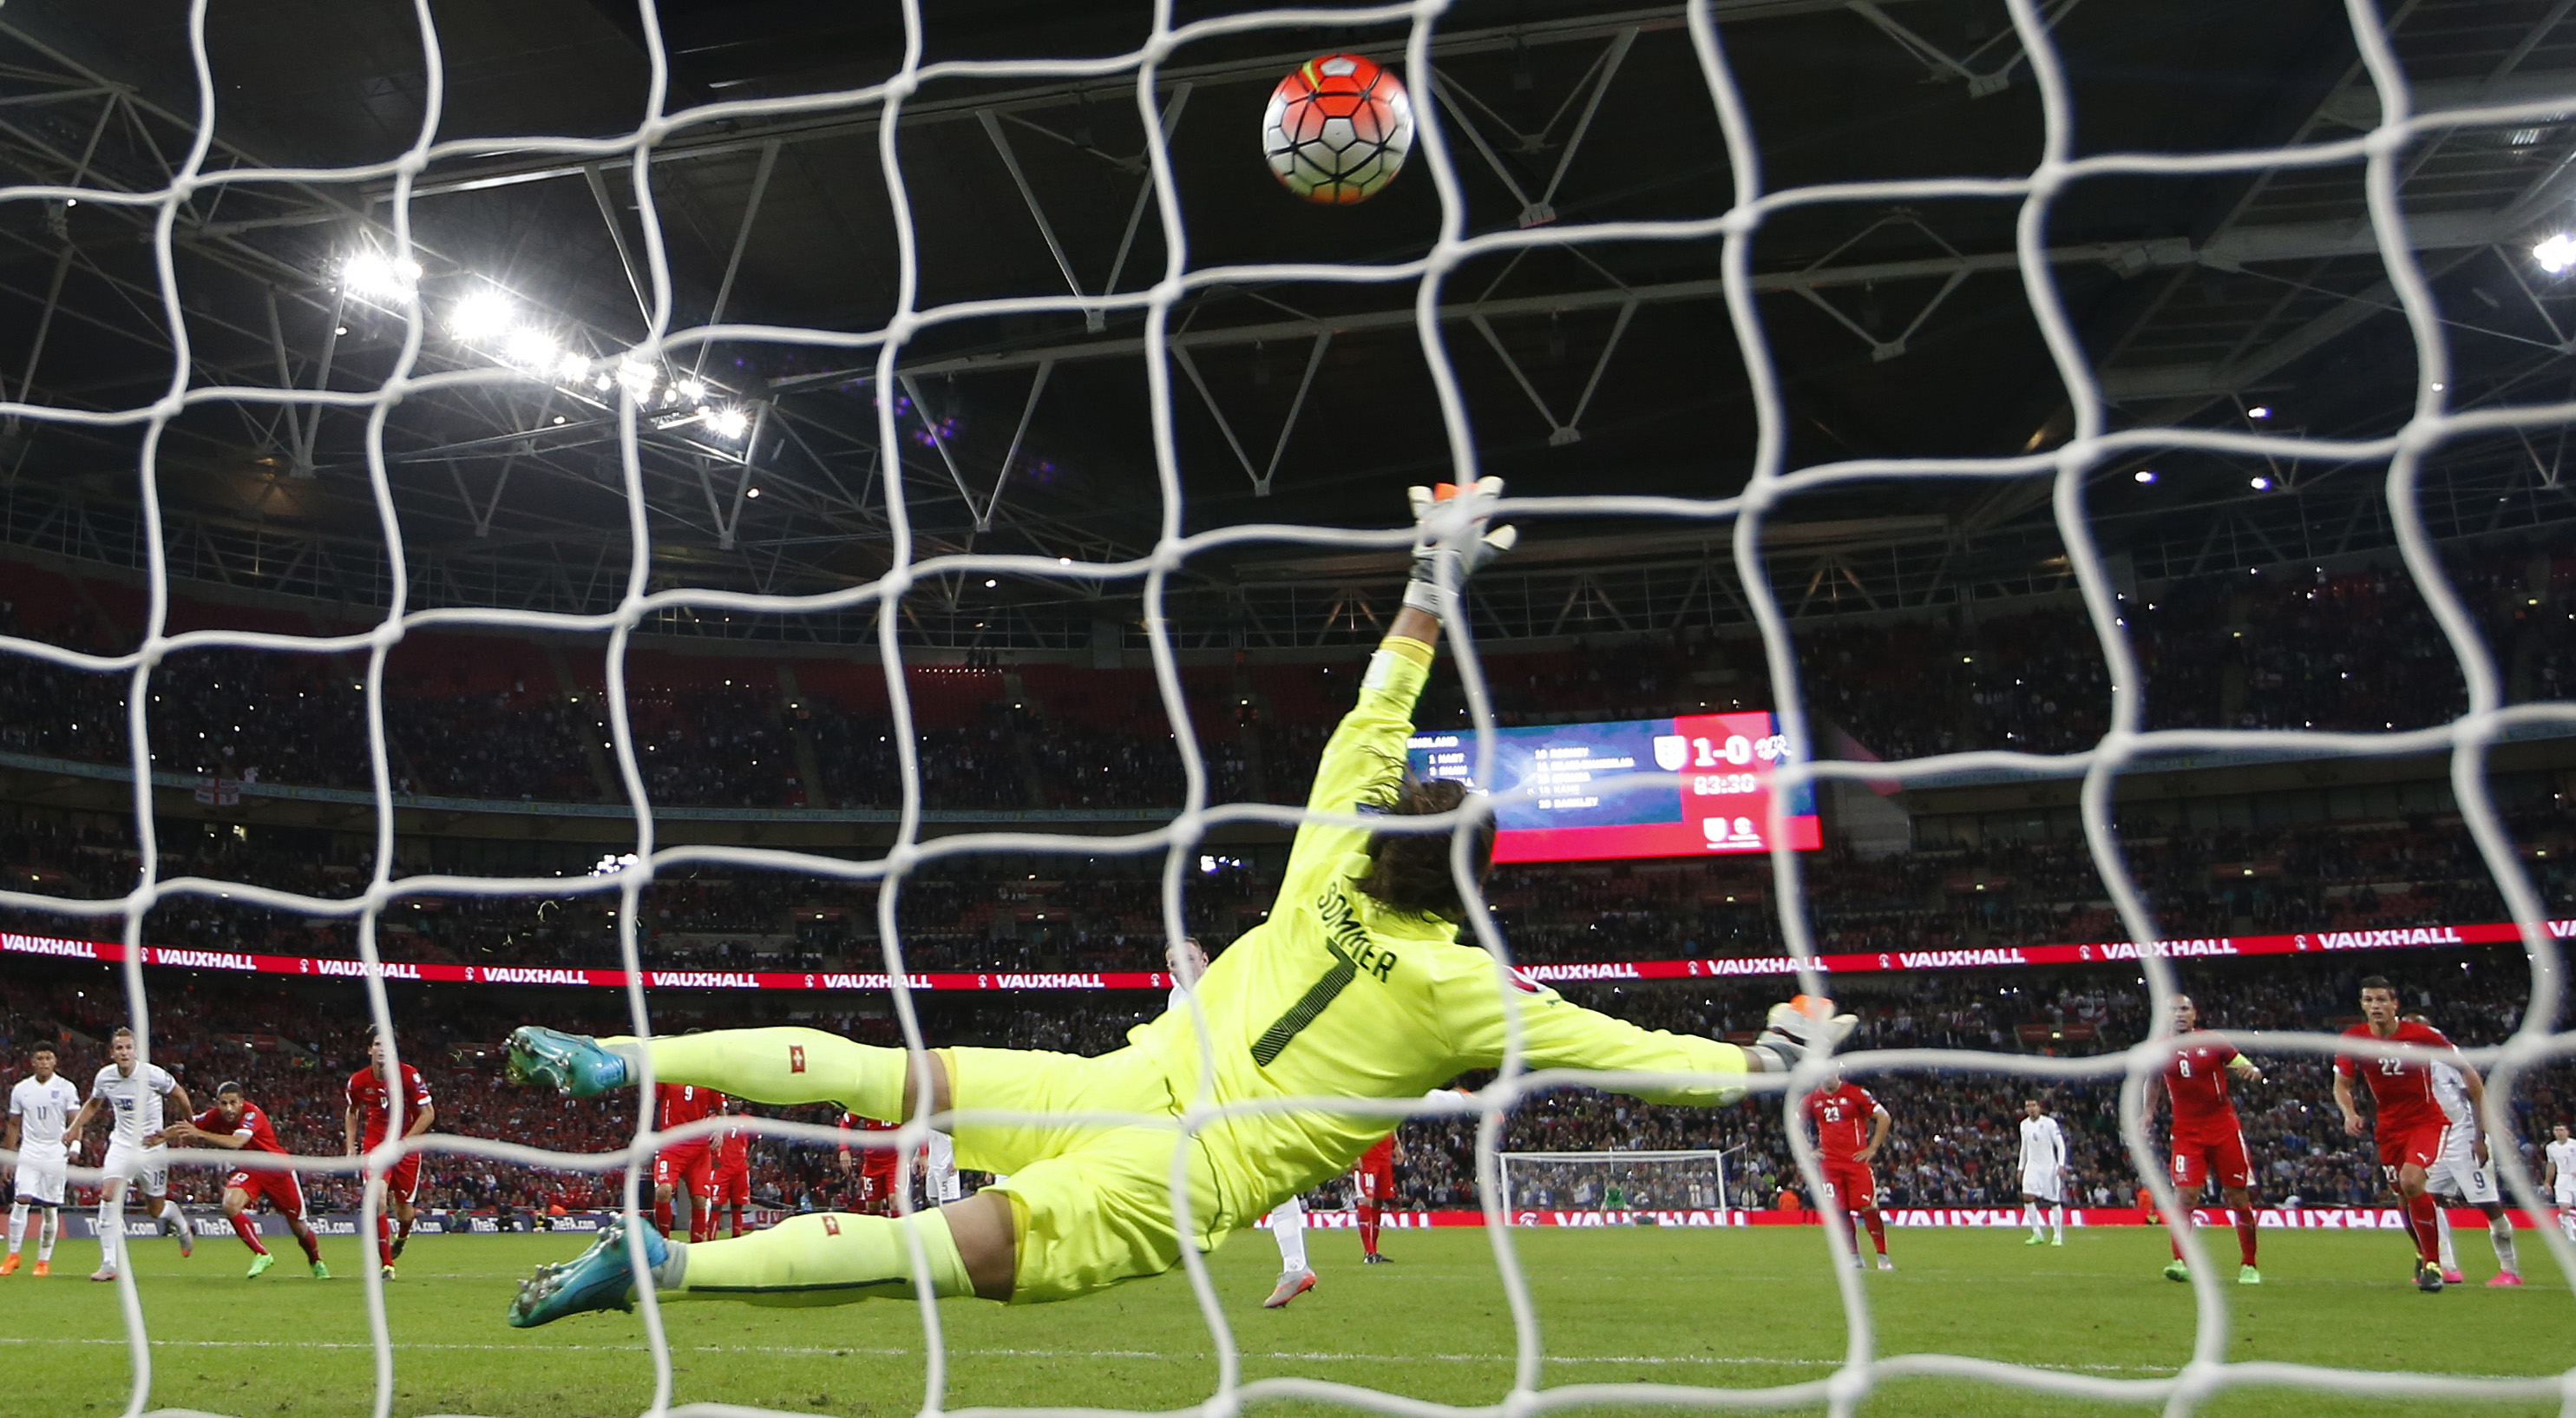 Football - England v Switzerland - UEFA Euro 2016 Qualifying Group E - Wembley Stadium, London, England - 8/9/15 Wayne Rooney scores the second goal for England from the penalty spot and becomes England's all time leading goalscorer Action Images via Reuters / John Sibley Livepic EDITORIAL USE ONLY.